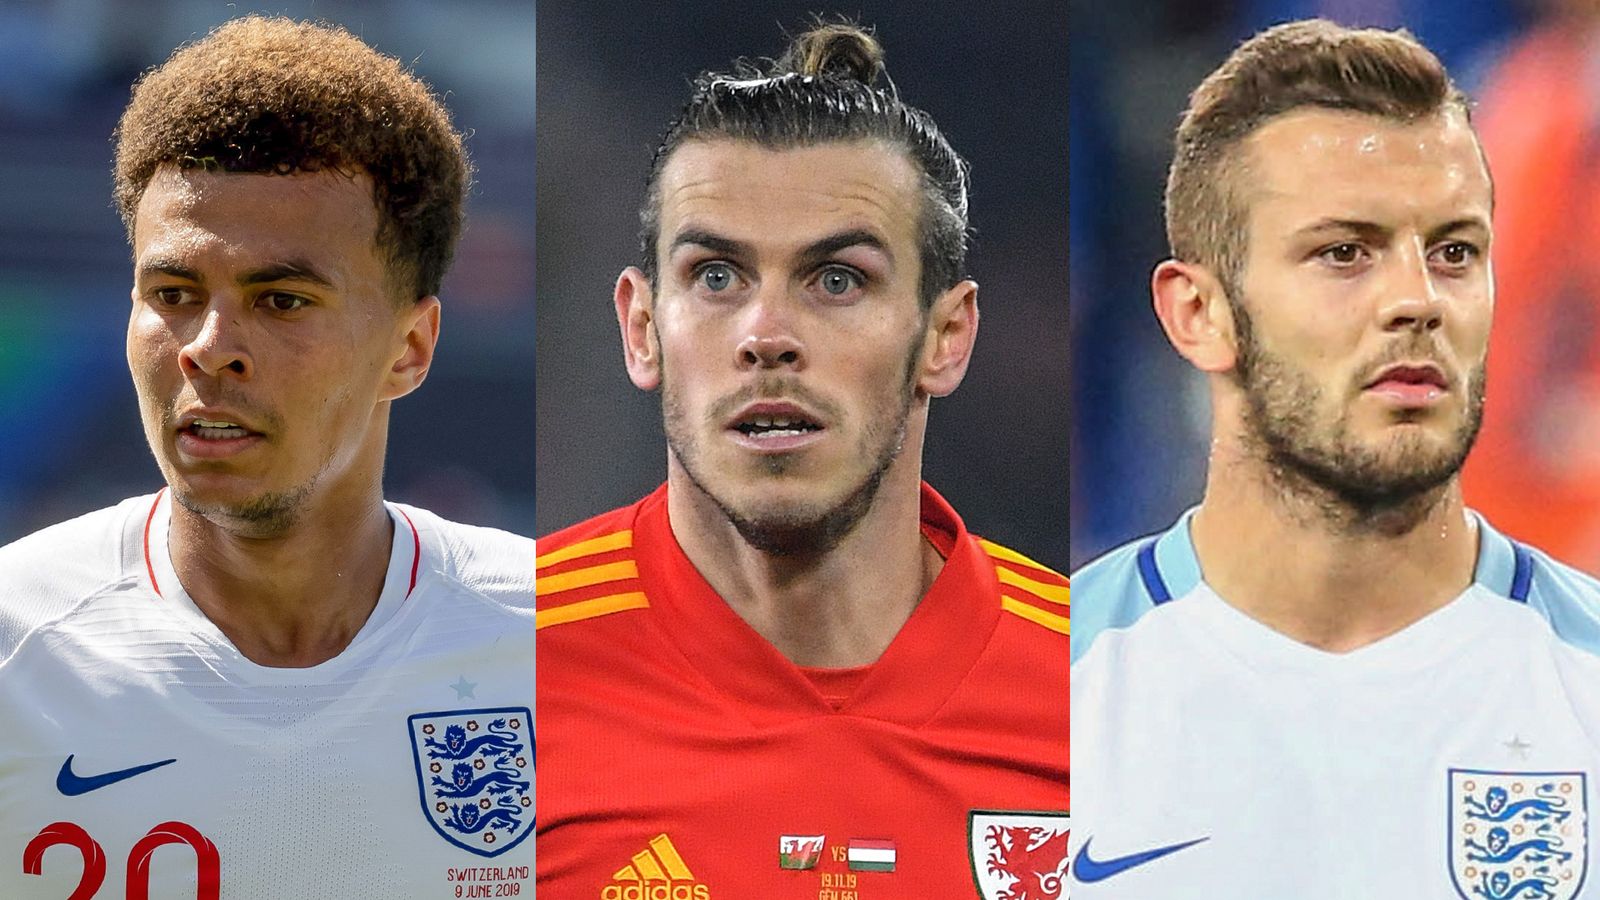 england-and-wales-euro-2016-players-have-had-contrasting-transfer-fortunes